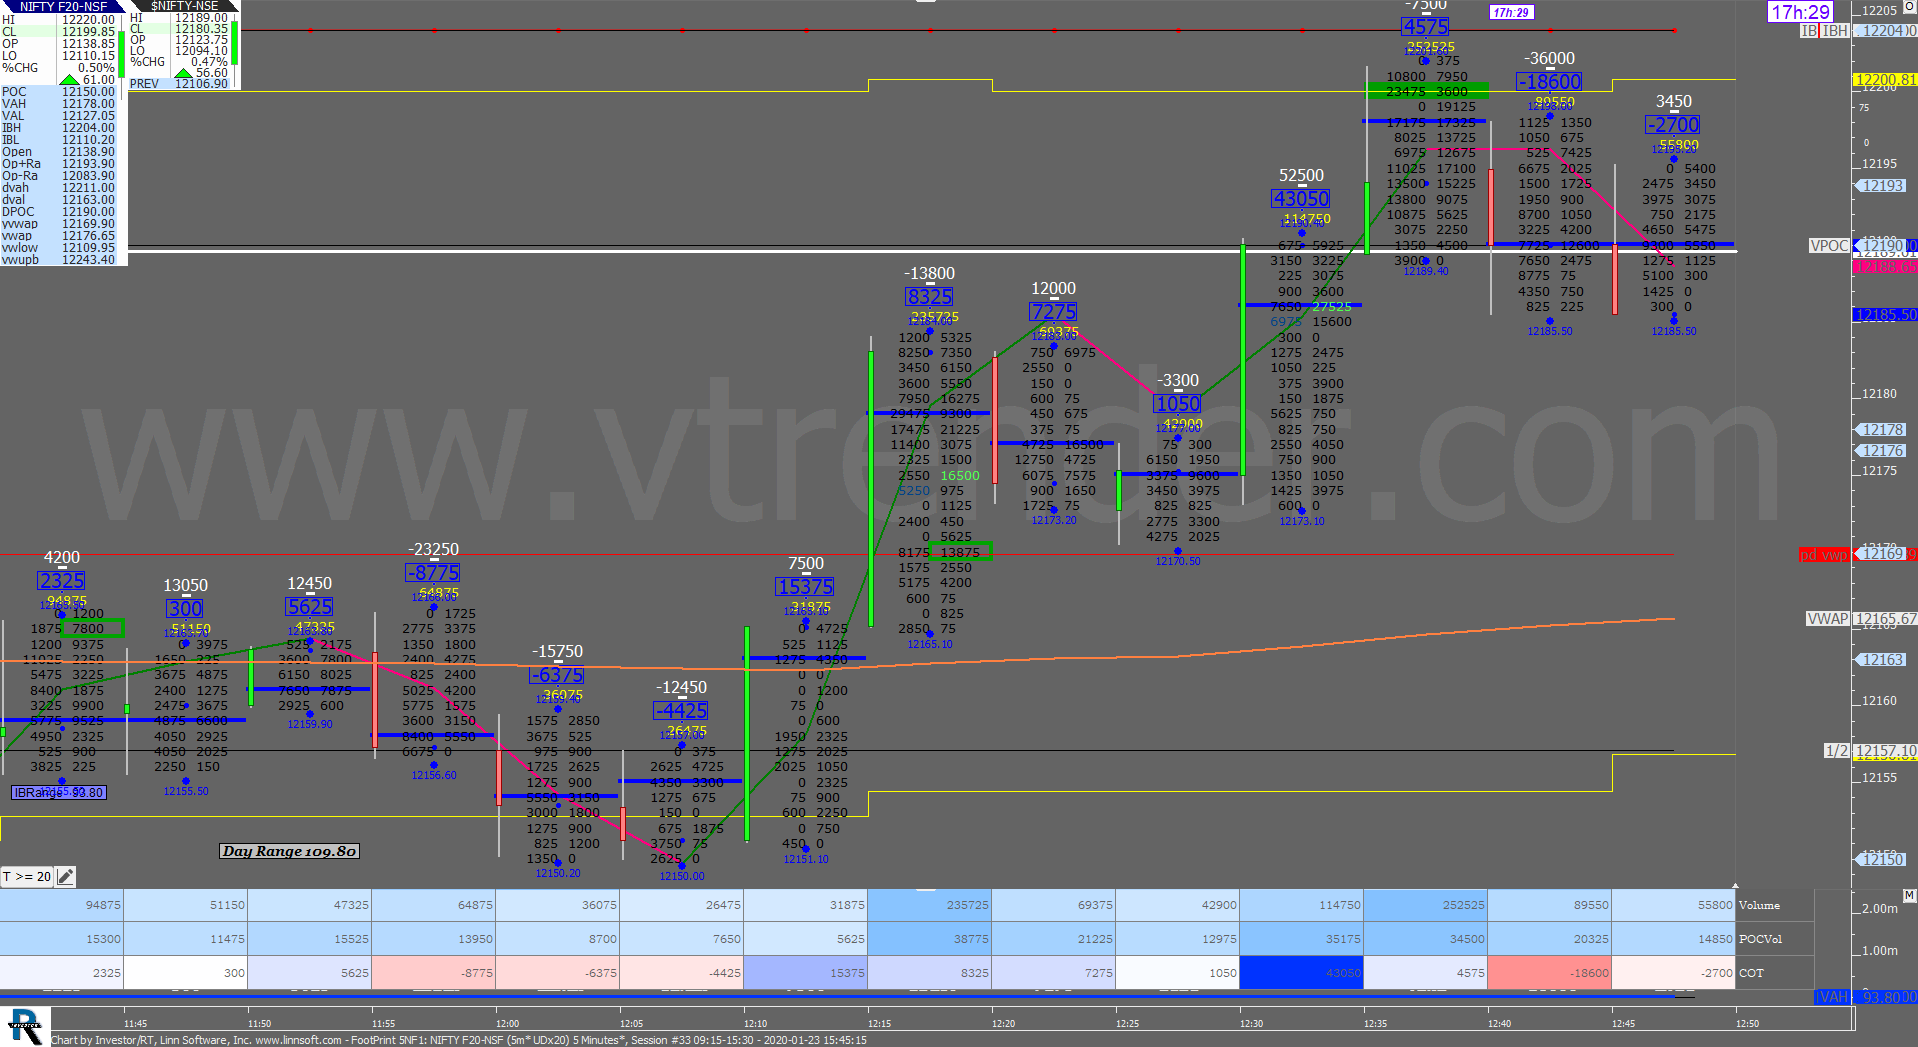 3 31 Order Flow Charts Dated 23Rd Jan 2020 (5 Mins) Banknifty Futures, Day Trading, Intraday Trading, Intraday Trading Strategies, Nifty Futures, Order Flow Analysis, Support And Resistance, Trading Strategies, Volume Profile Trading